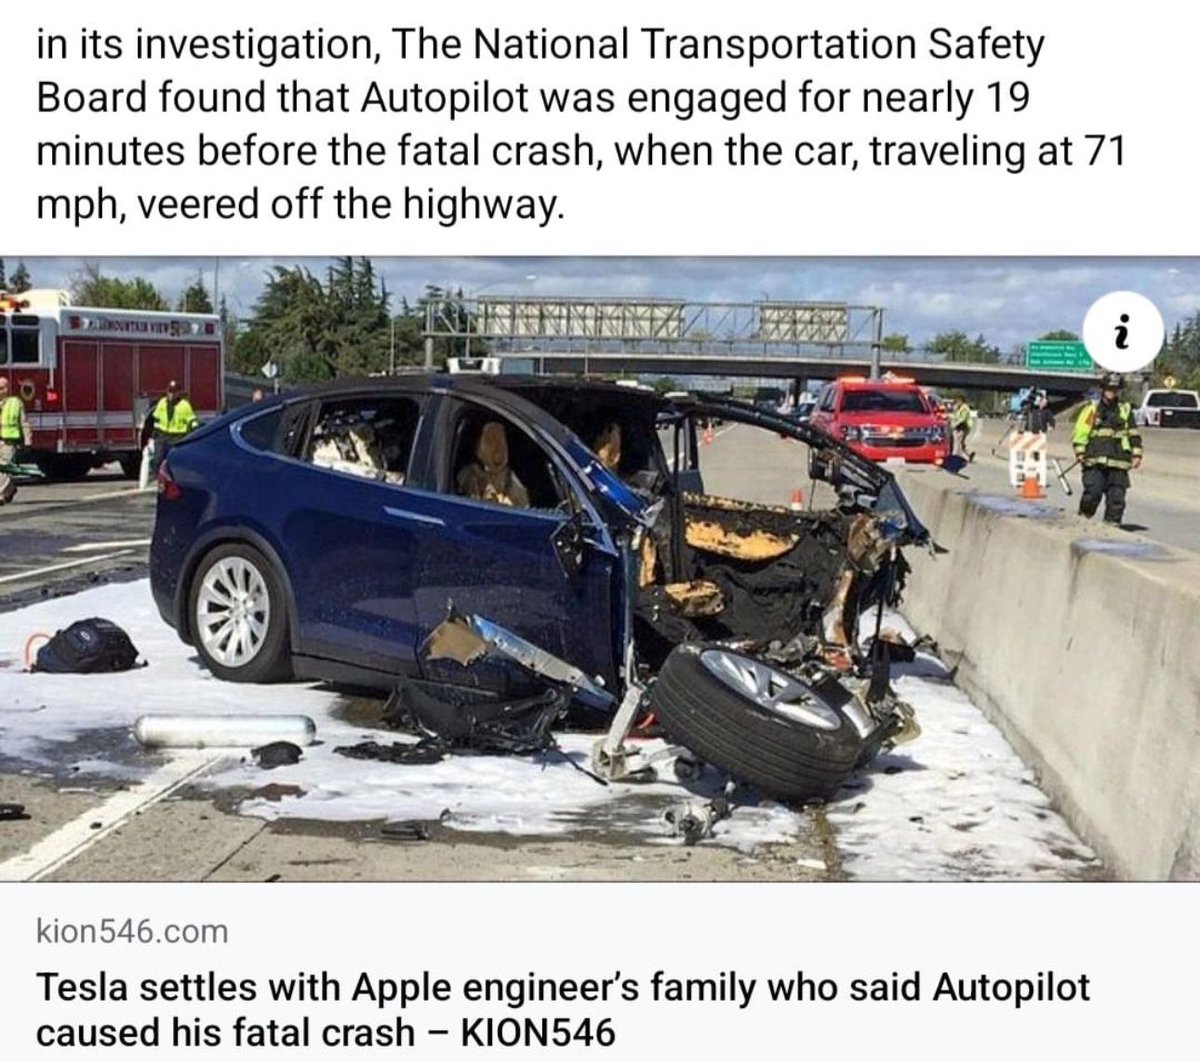 Really sad. I would never trust Teslas autopilot. Seen too many crashes and failures. Ford blue cruise is so much safer.